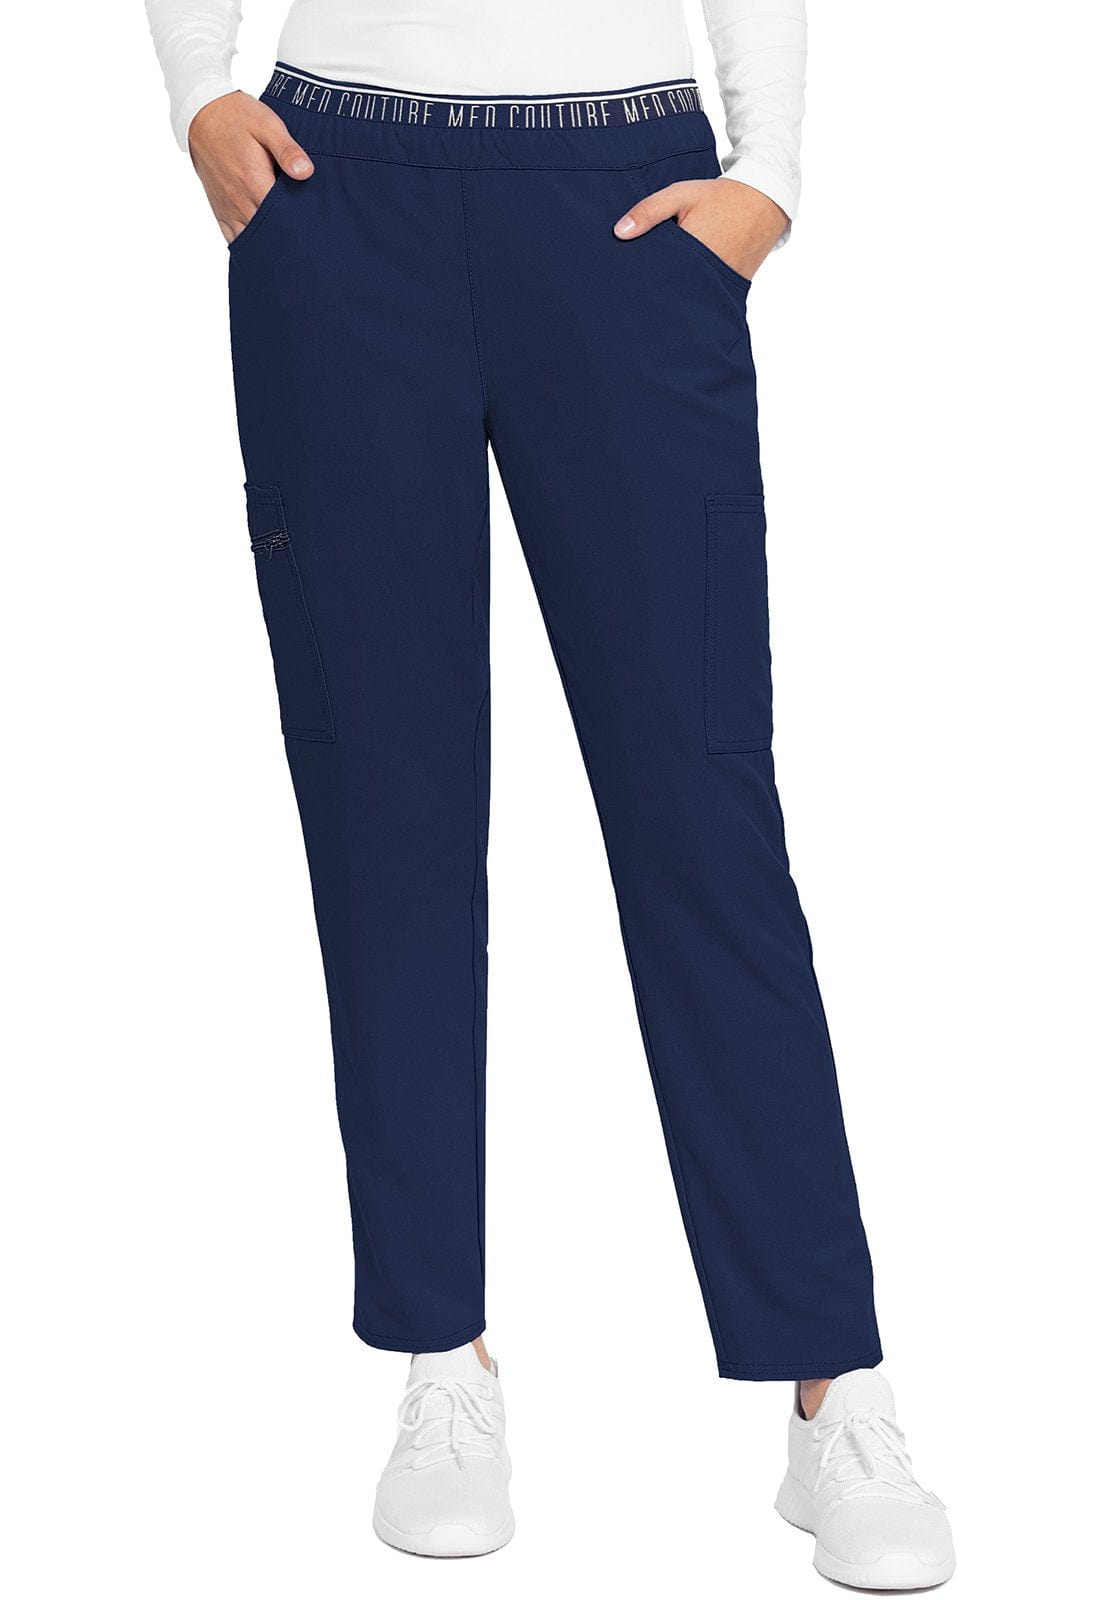 Med Couture MC Insight Navy / M MC Insight Tall Mid-rise Tapered Leg Pull-on Scrub Pant MC009T